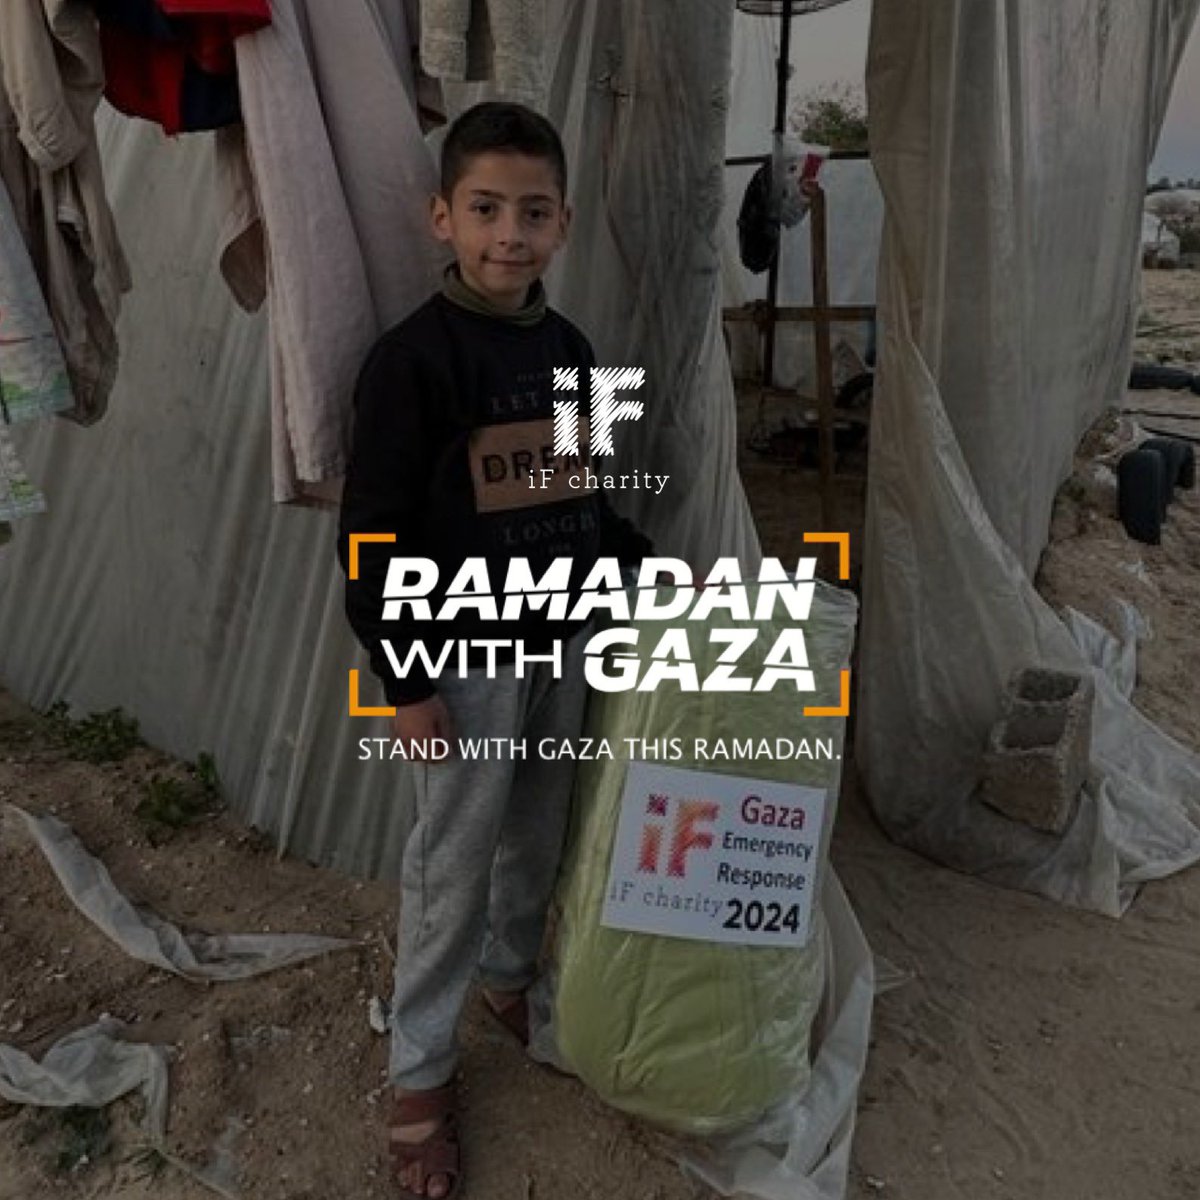 As we approach the end of Ramadan, let us extend our hearts and hands to the resilient community of Gaza.

Together, let's stand with Gaza, embodying the true spirit of Ramadan through our collective action and unwavering support. 

muslimgiving.org/RamadanWithGaza

@iFCharityUK